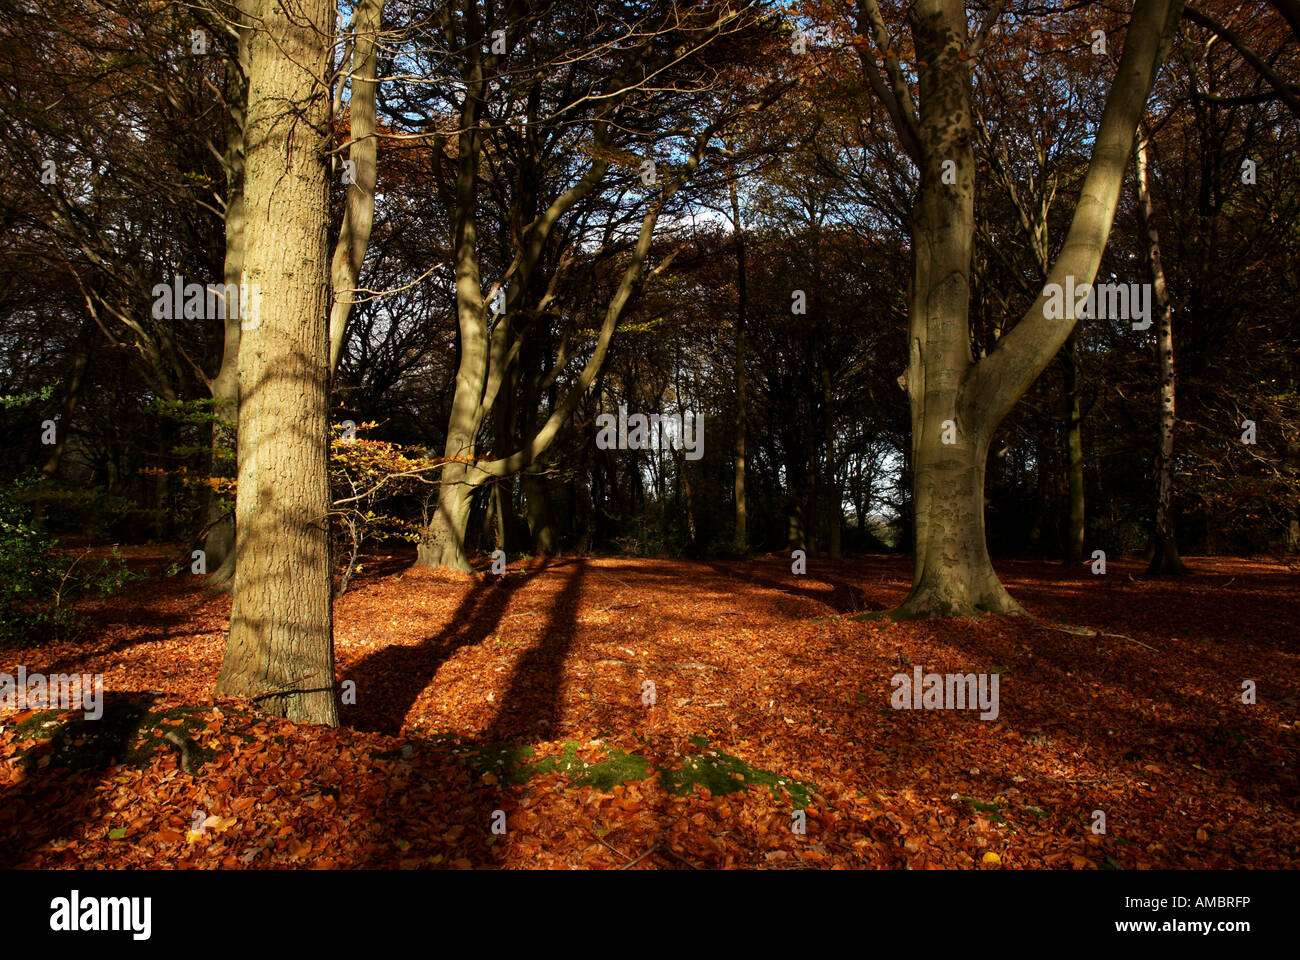 A peaceful scene of a Chiltern wood near Henley with the Autumn colours lit up by low afternoon sun. Stock Photo